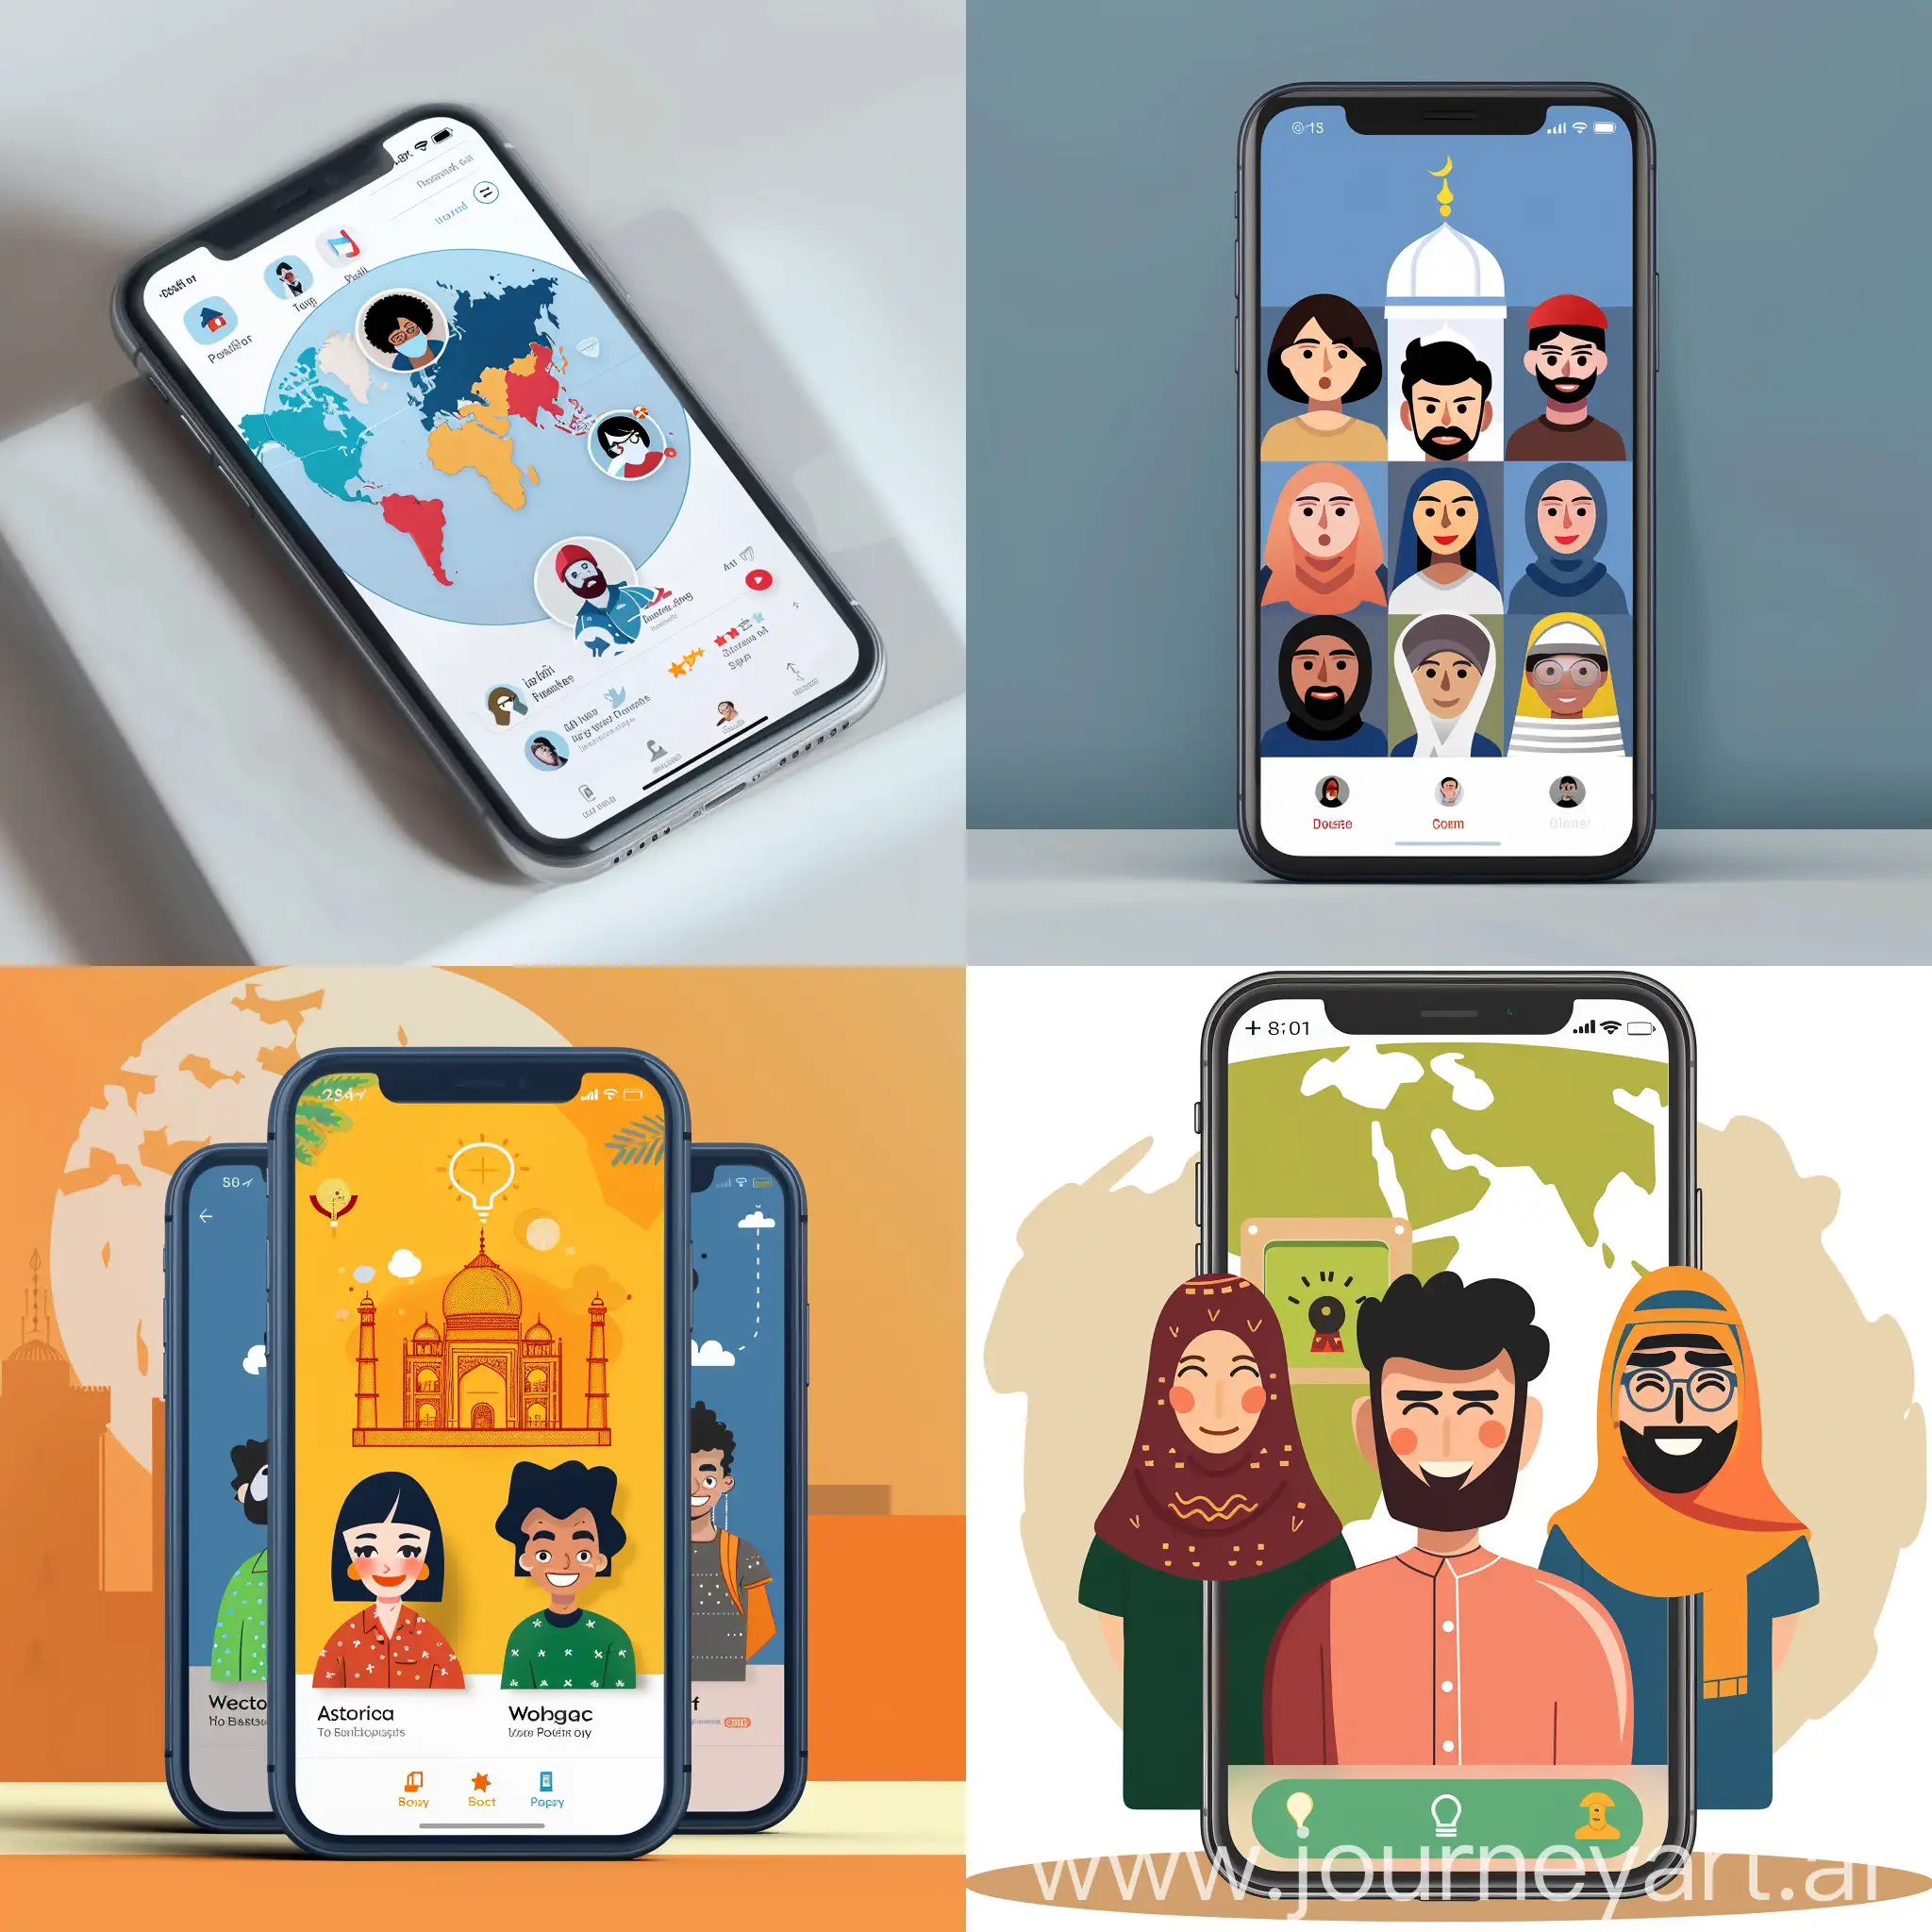 A mobile application for connecting people of the same culture background in foreign countries